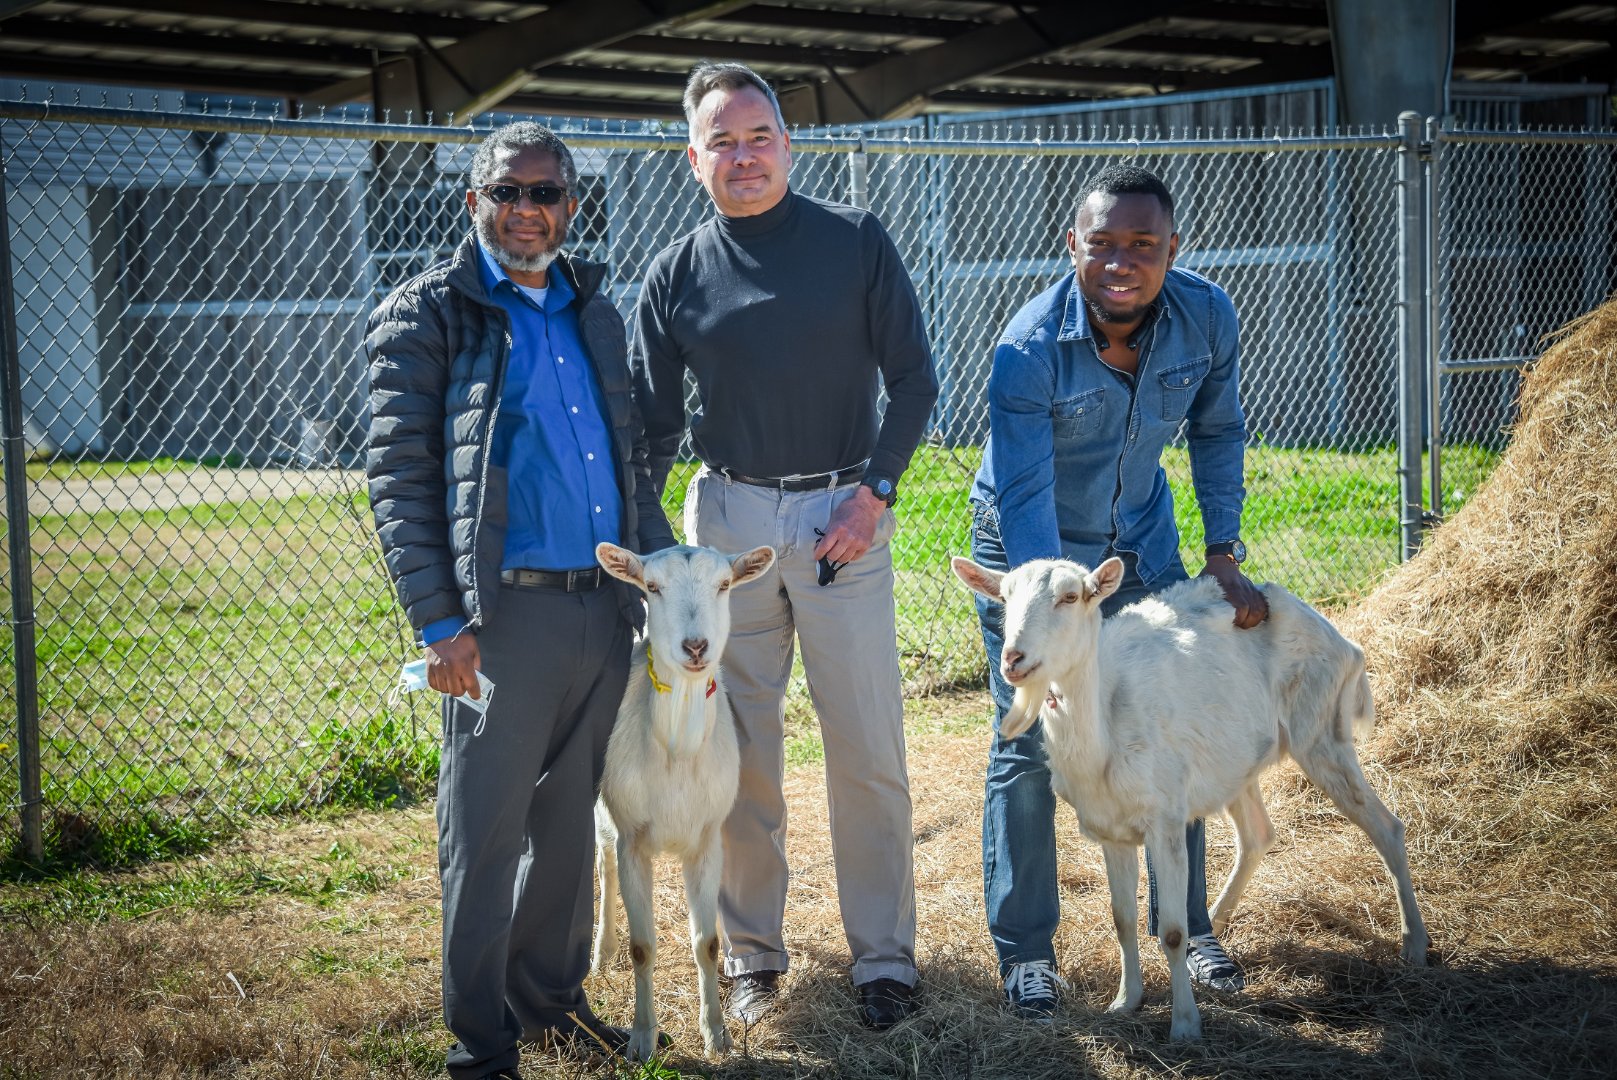 Dr. George McCommon (center), head of Fort Valley State University’s Veterinary Science Department, and his team, including veterinary science professor Dr. Saul Mofya (left) and research assistant Dr. Kingsley Kalu (right), are researching treatment options for mastitis in goats.